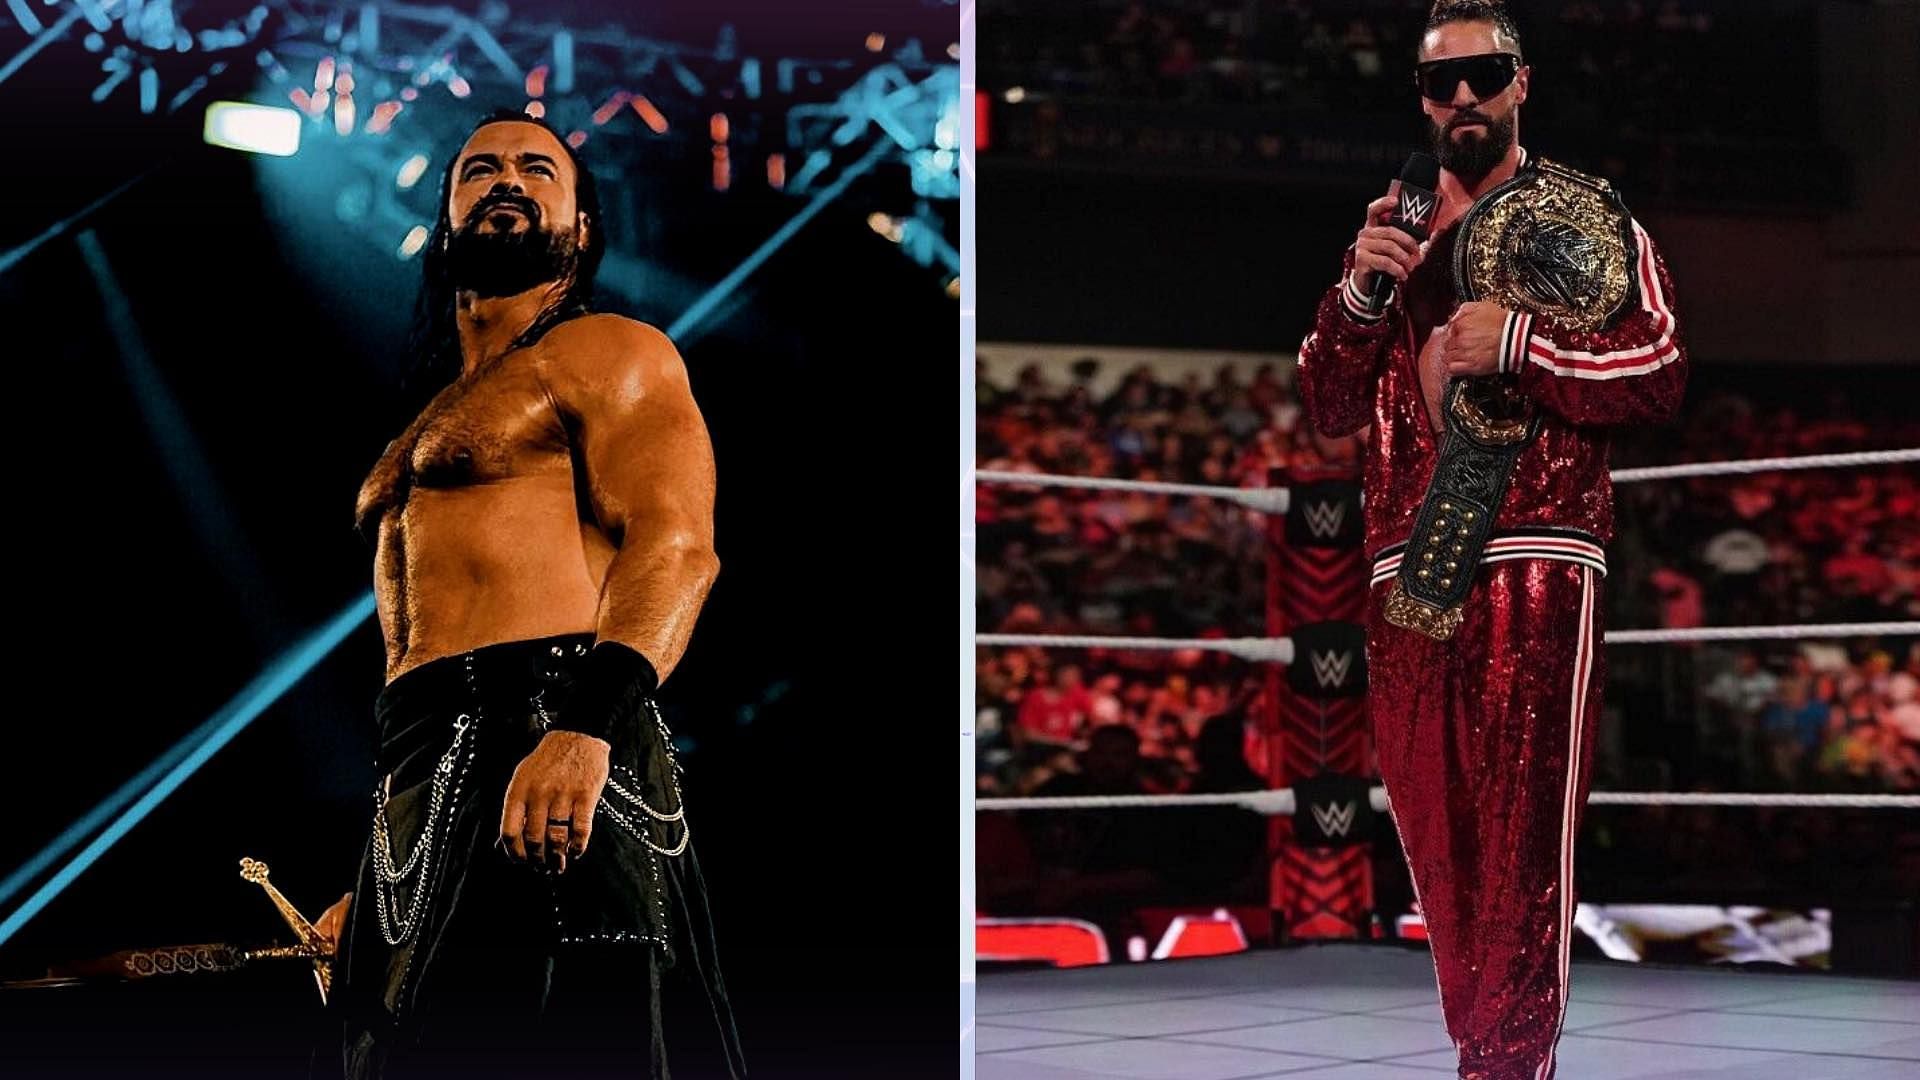 Drew McIntyre and Seth Rollins will clash at WWE Crown Jewel 2023